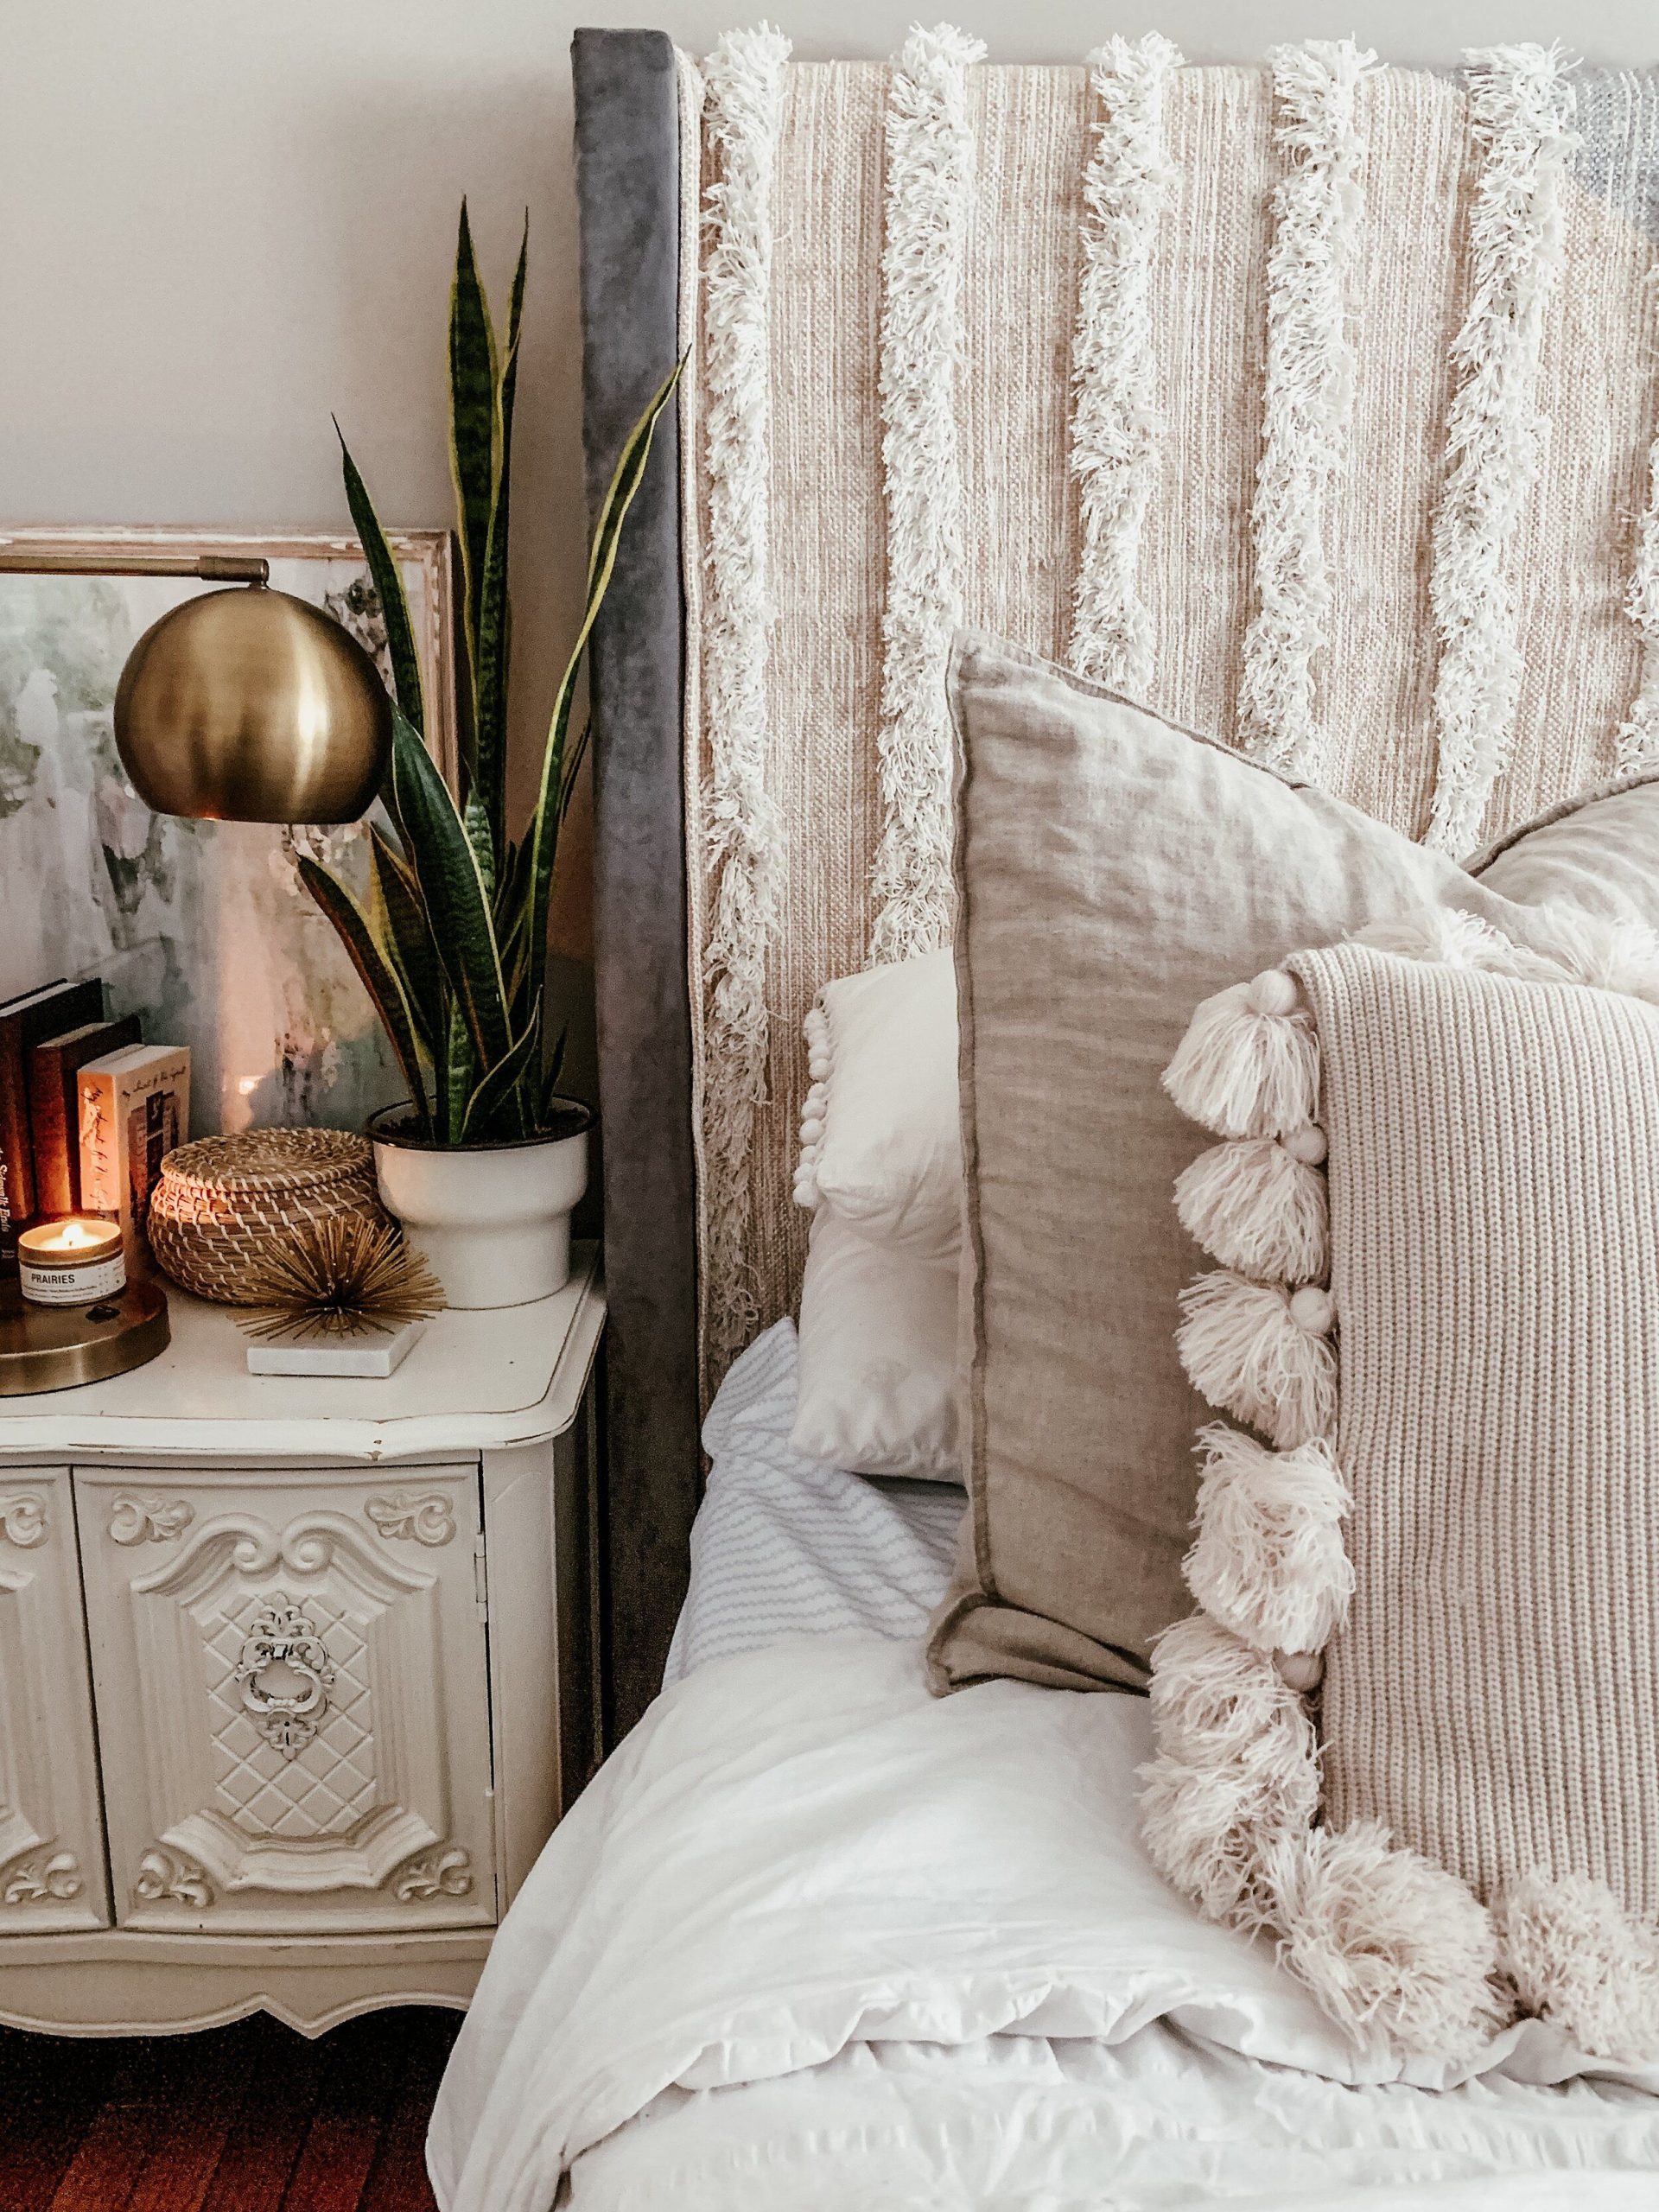 DIY Rug Projects: Adding A Personal Touch To Your Bedroom Decor